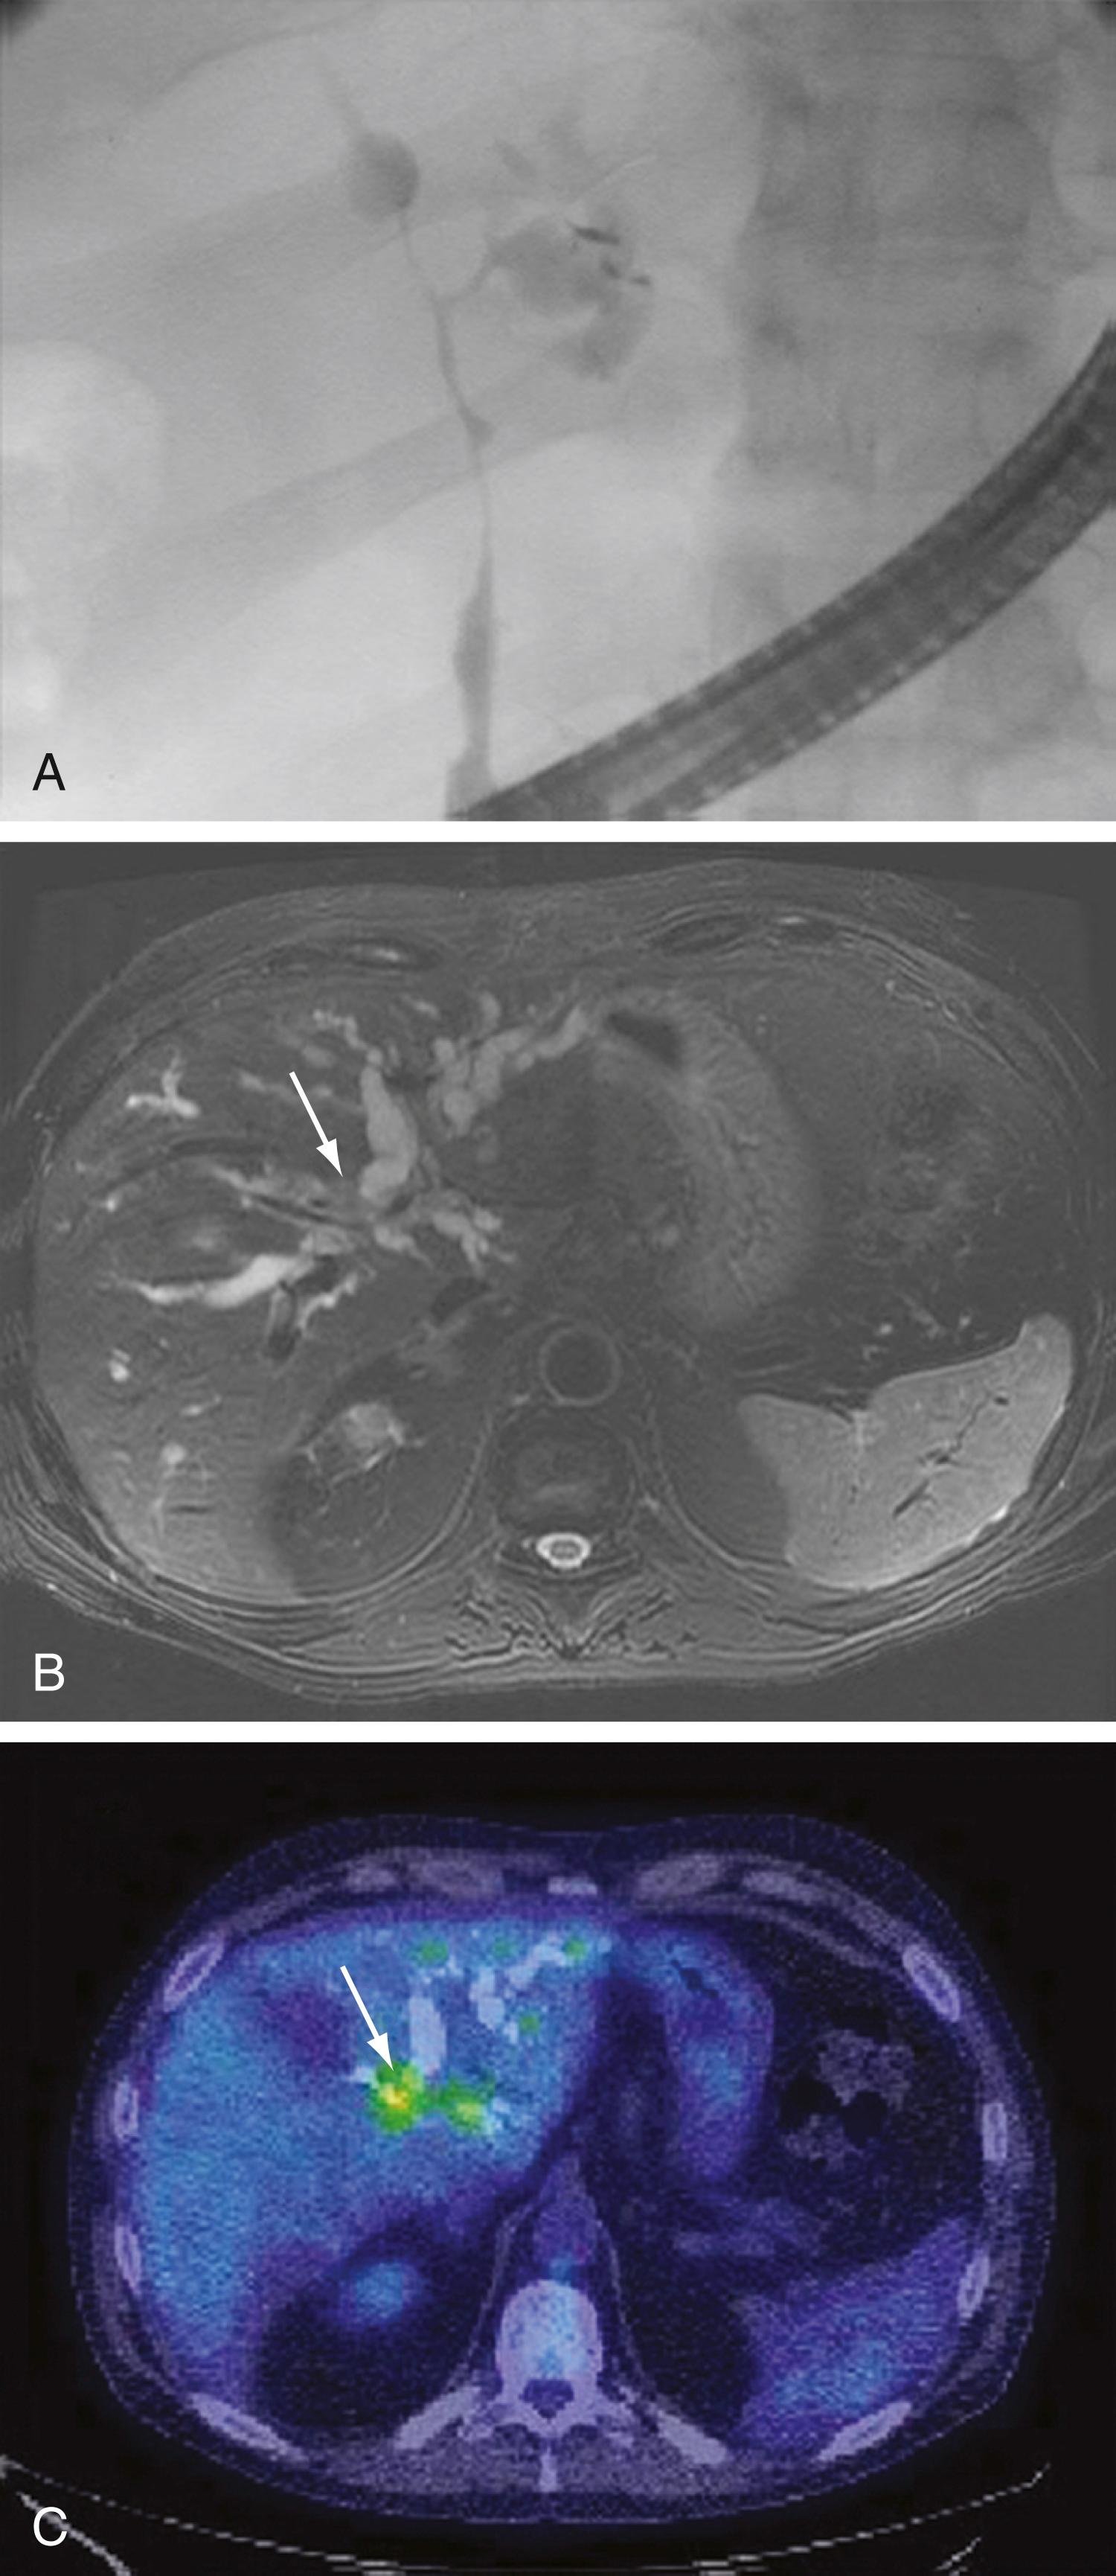 Fig. 69.5, Imaging of perihilar cholangiocarcinoma. A , Film from an ERCP in a patient with perihilar cholangiocarcinoma demonstrating dominant strictures of the biliary tract consistent with Bismuth-Corlette type IV. B , Gadolinium-enhanced MRI with ferumoxide in the same patient. The arrow points to the biliary tumor seen on a T2-weighted image. C , PET/CT scan of the same patient. The biliary tumor is seen as an enhancing region ( arrow ).